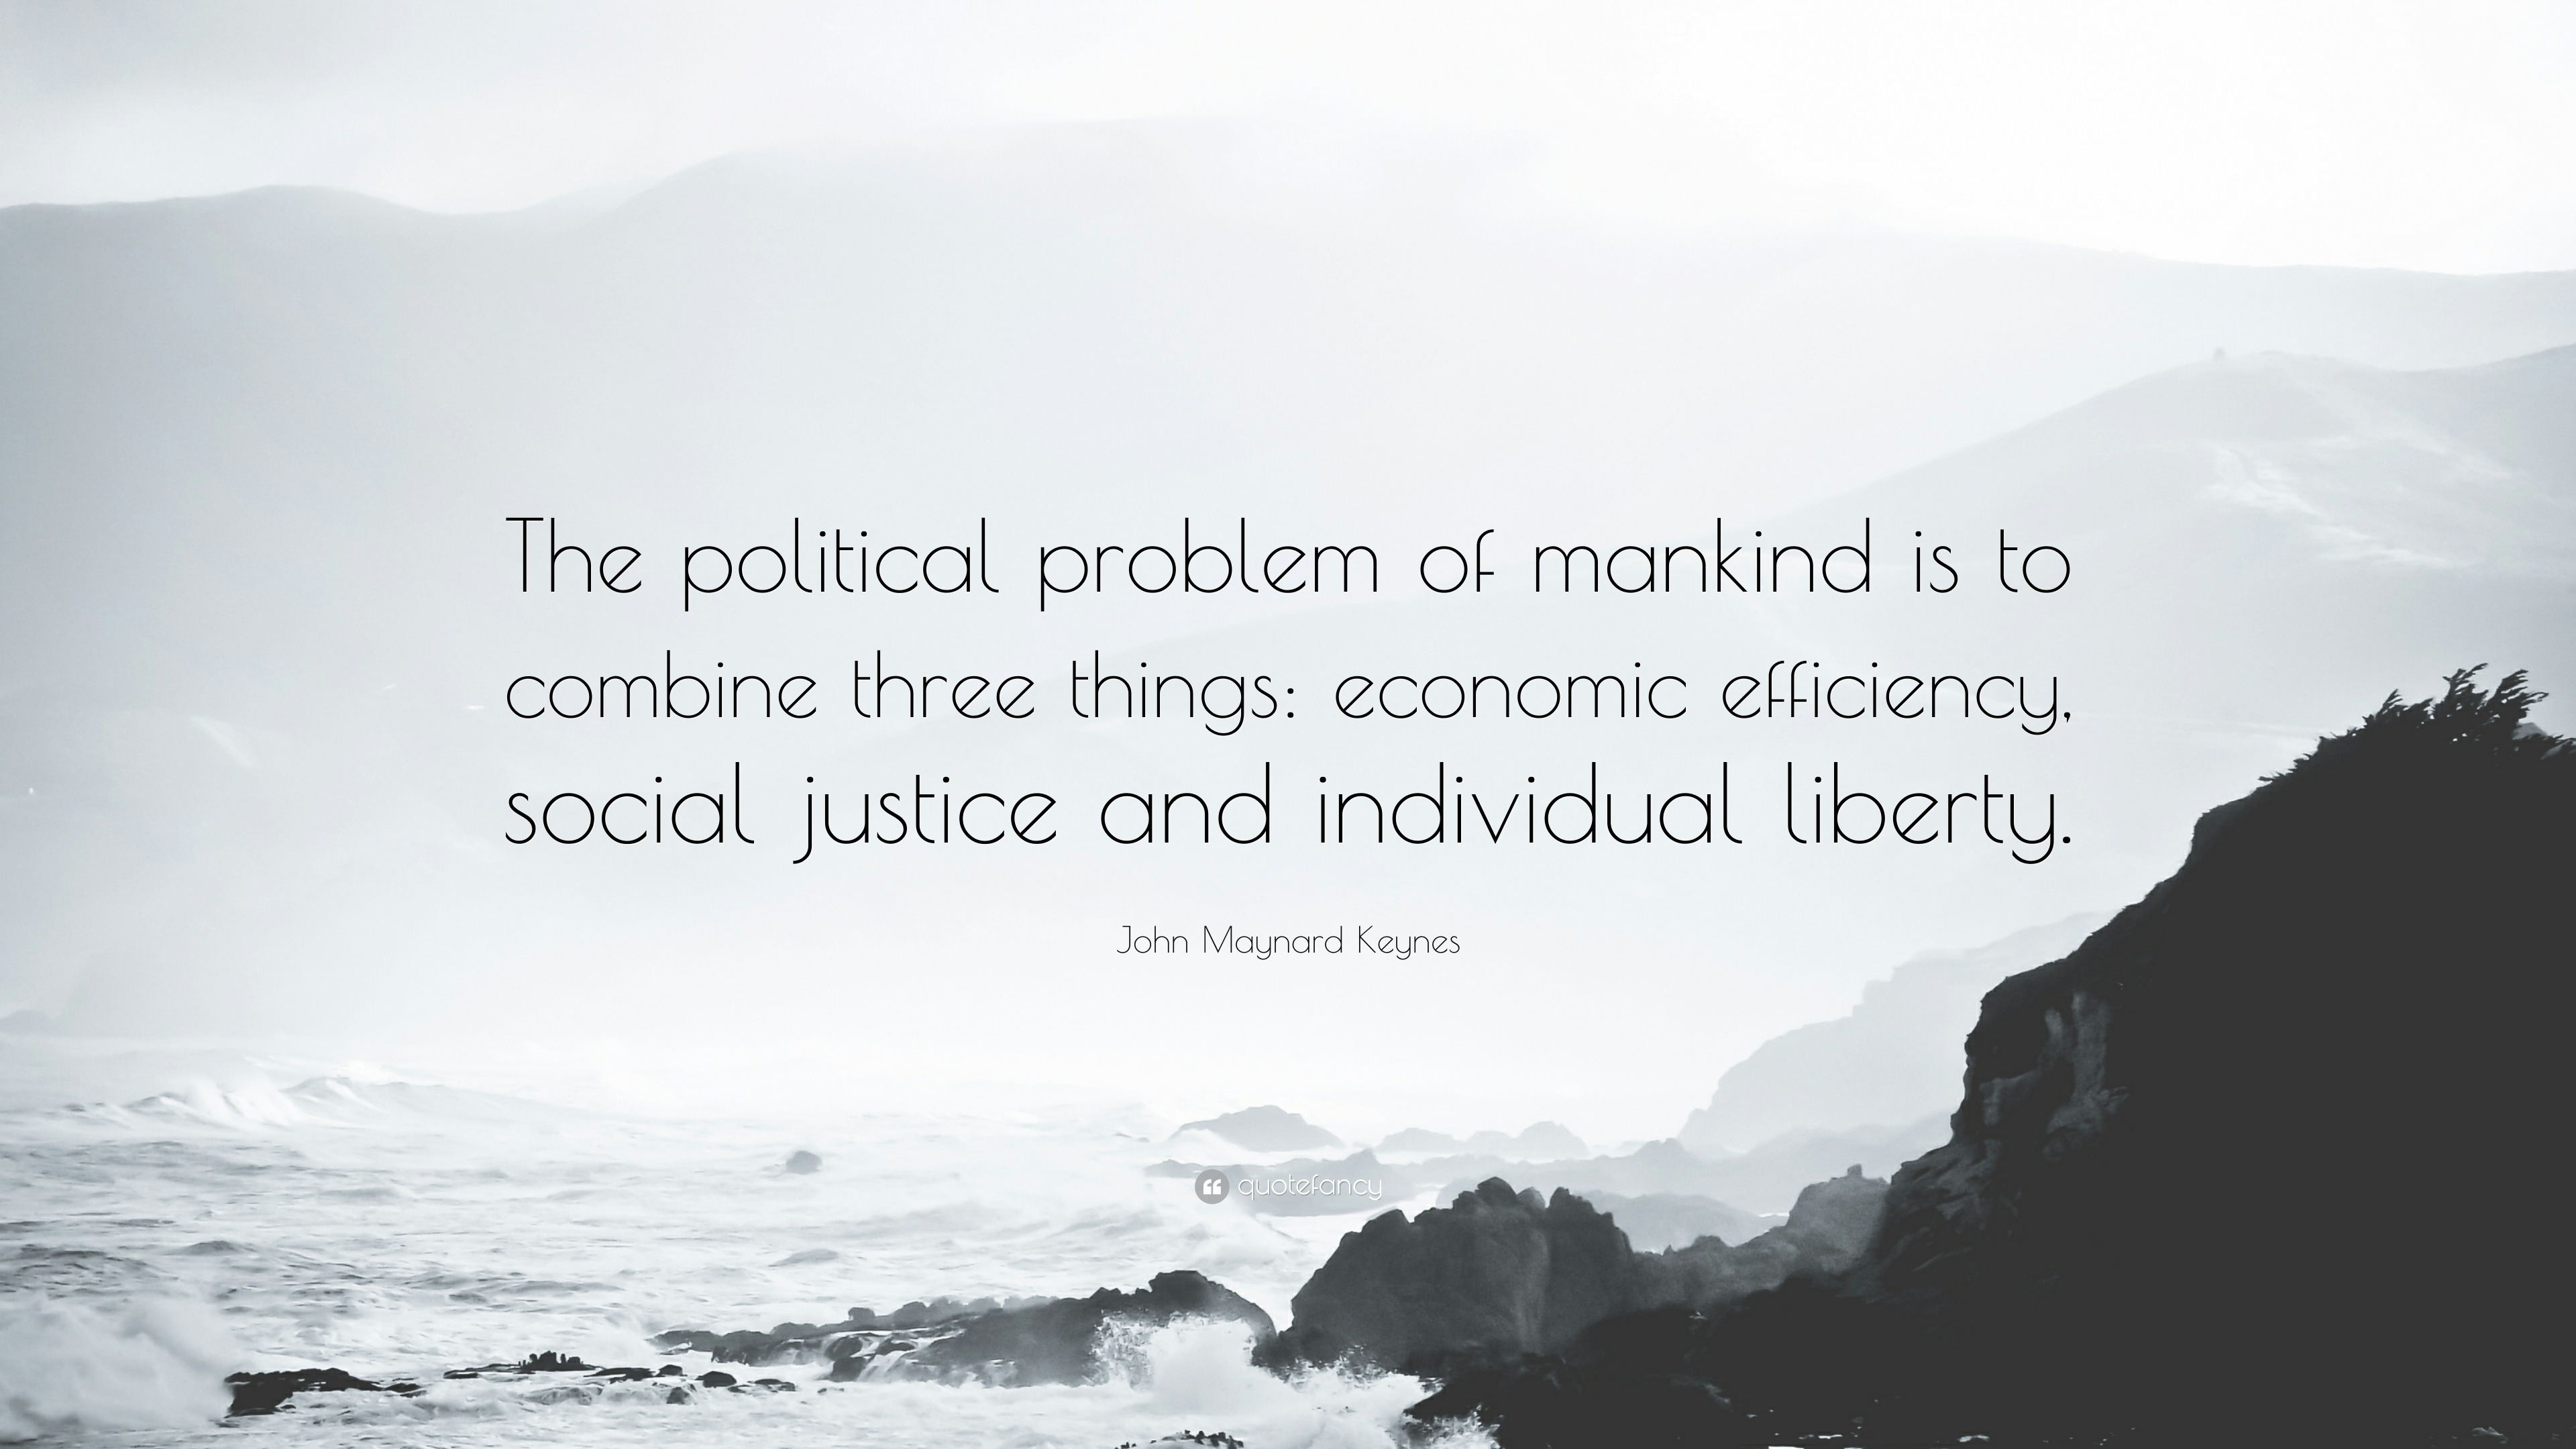 John Maynard Keynes Quote: “The political problem of mankind is to combine  three things: economic efficiency,